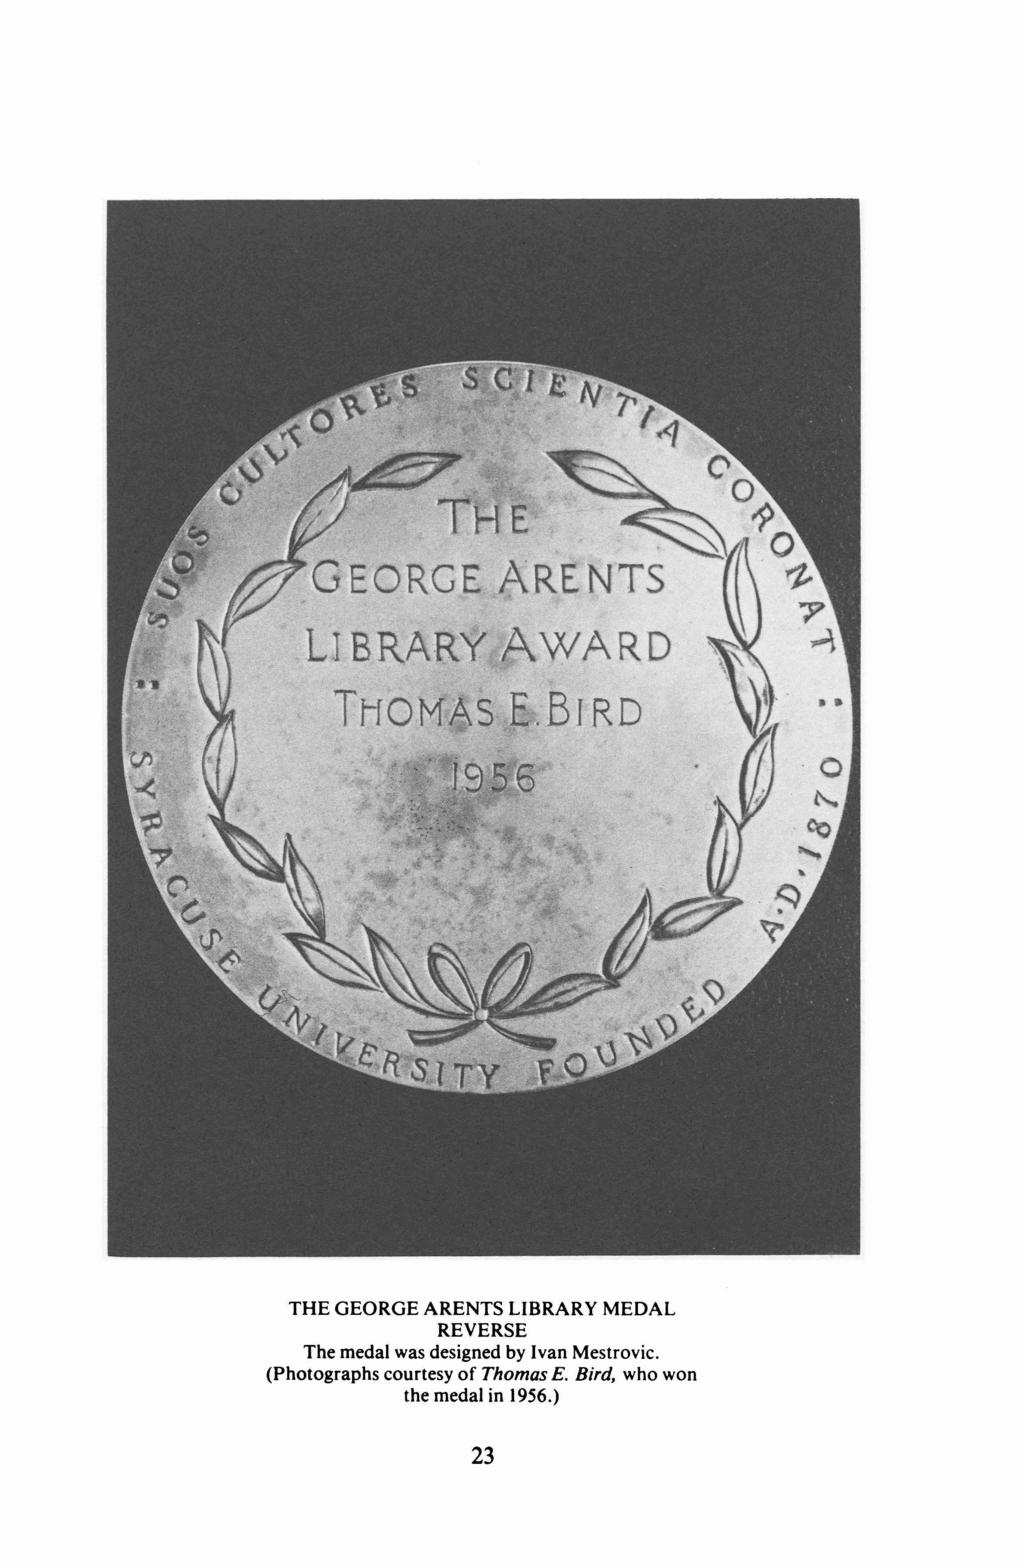 THE GEORGE ARENTS LIBRARY MEDAL REVERSE The medal was designed by Ivan